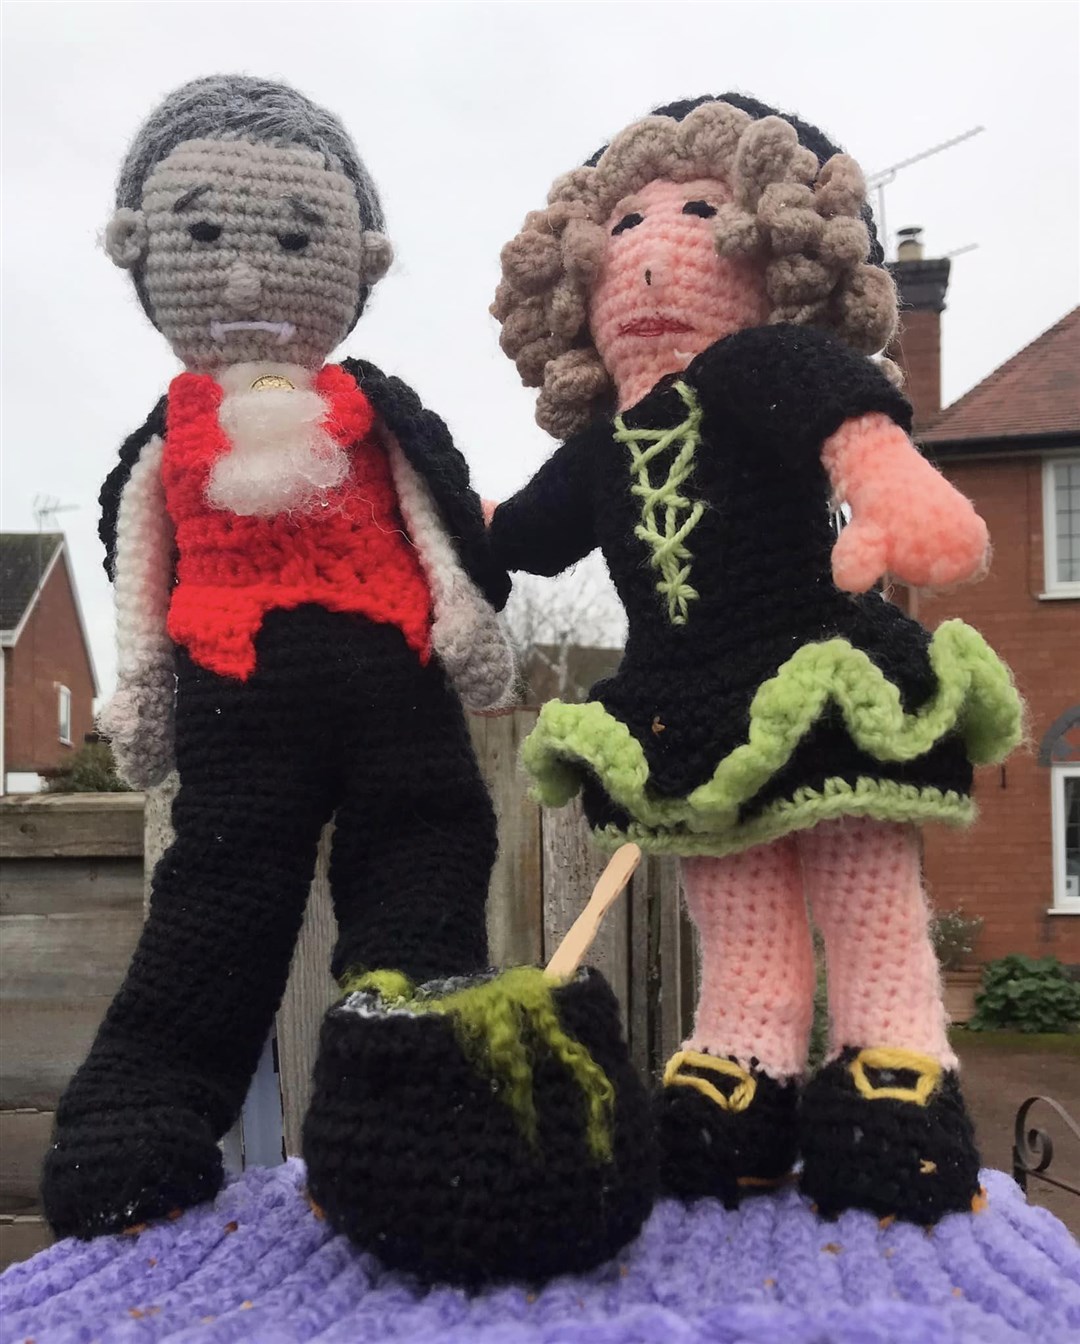 Dracula and his bride made by the Studley Stitchers (Studley Stitchers/Diane Dutton/PA)